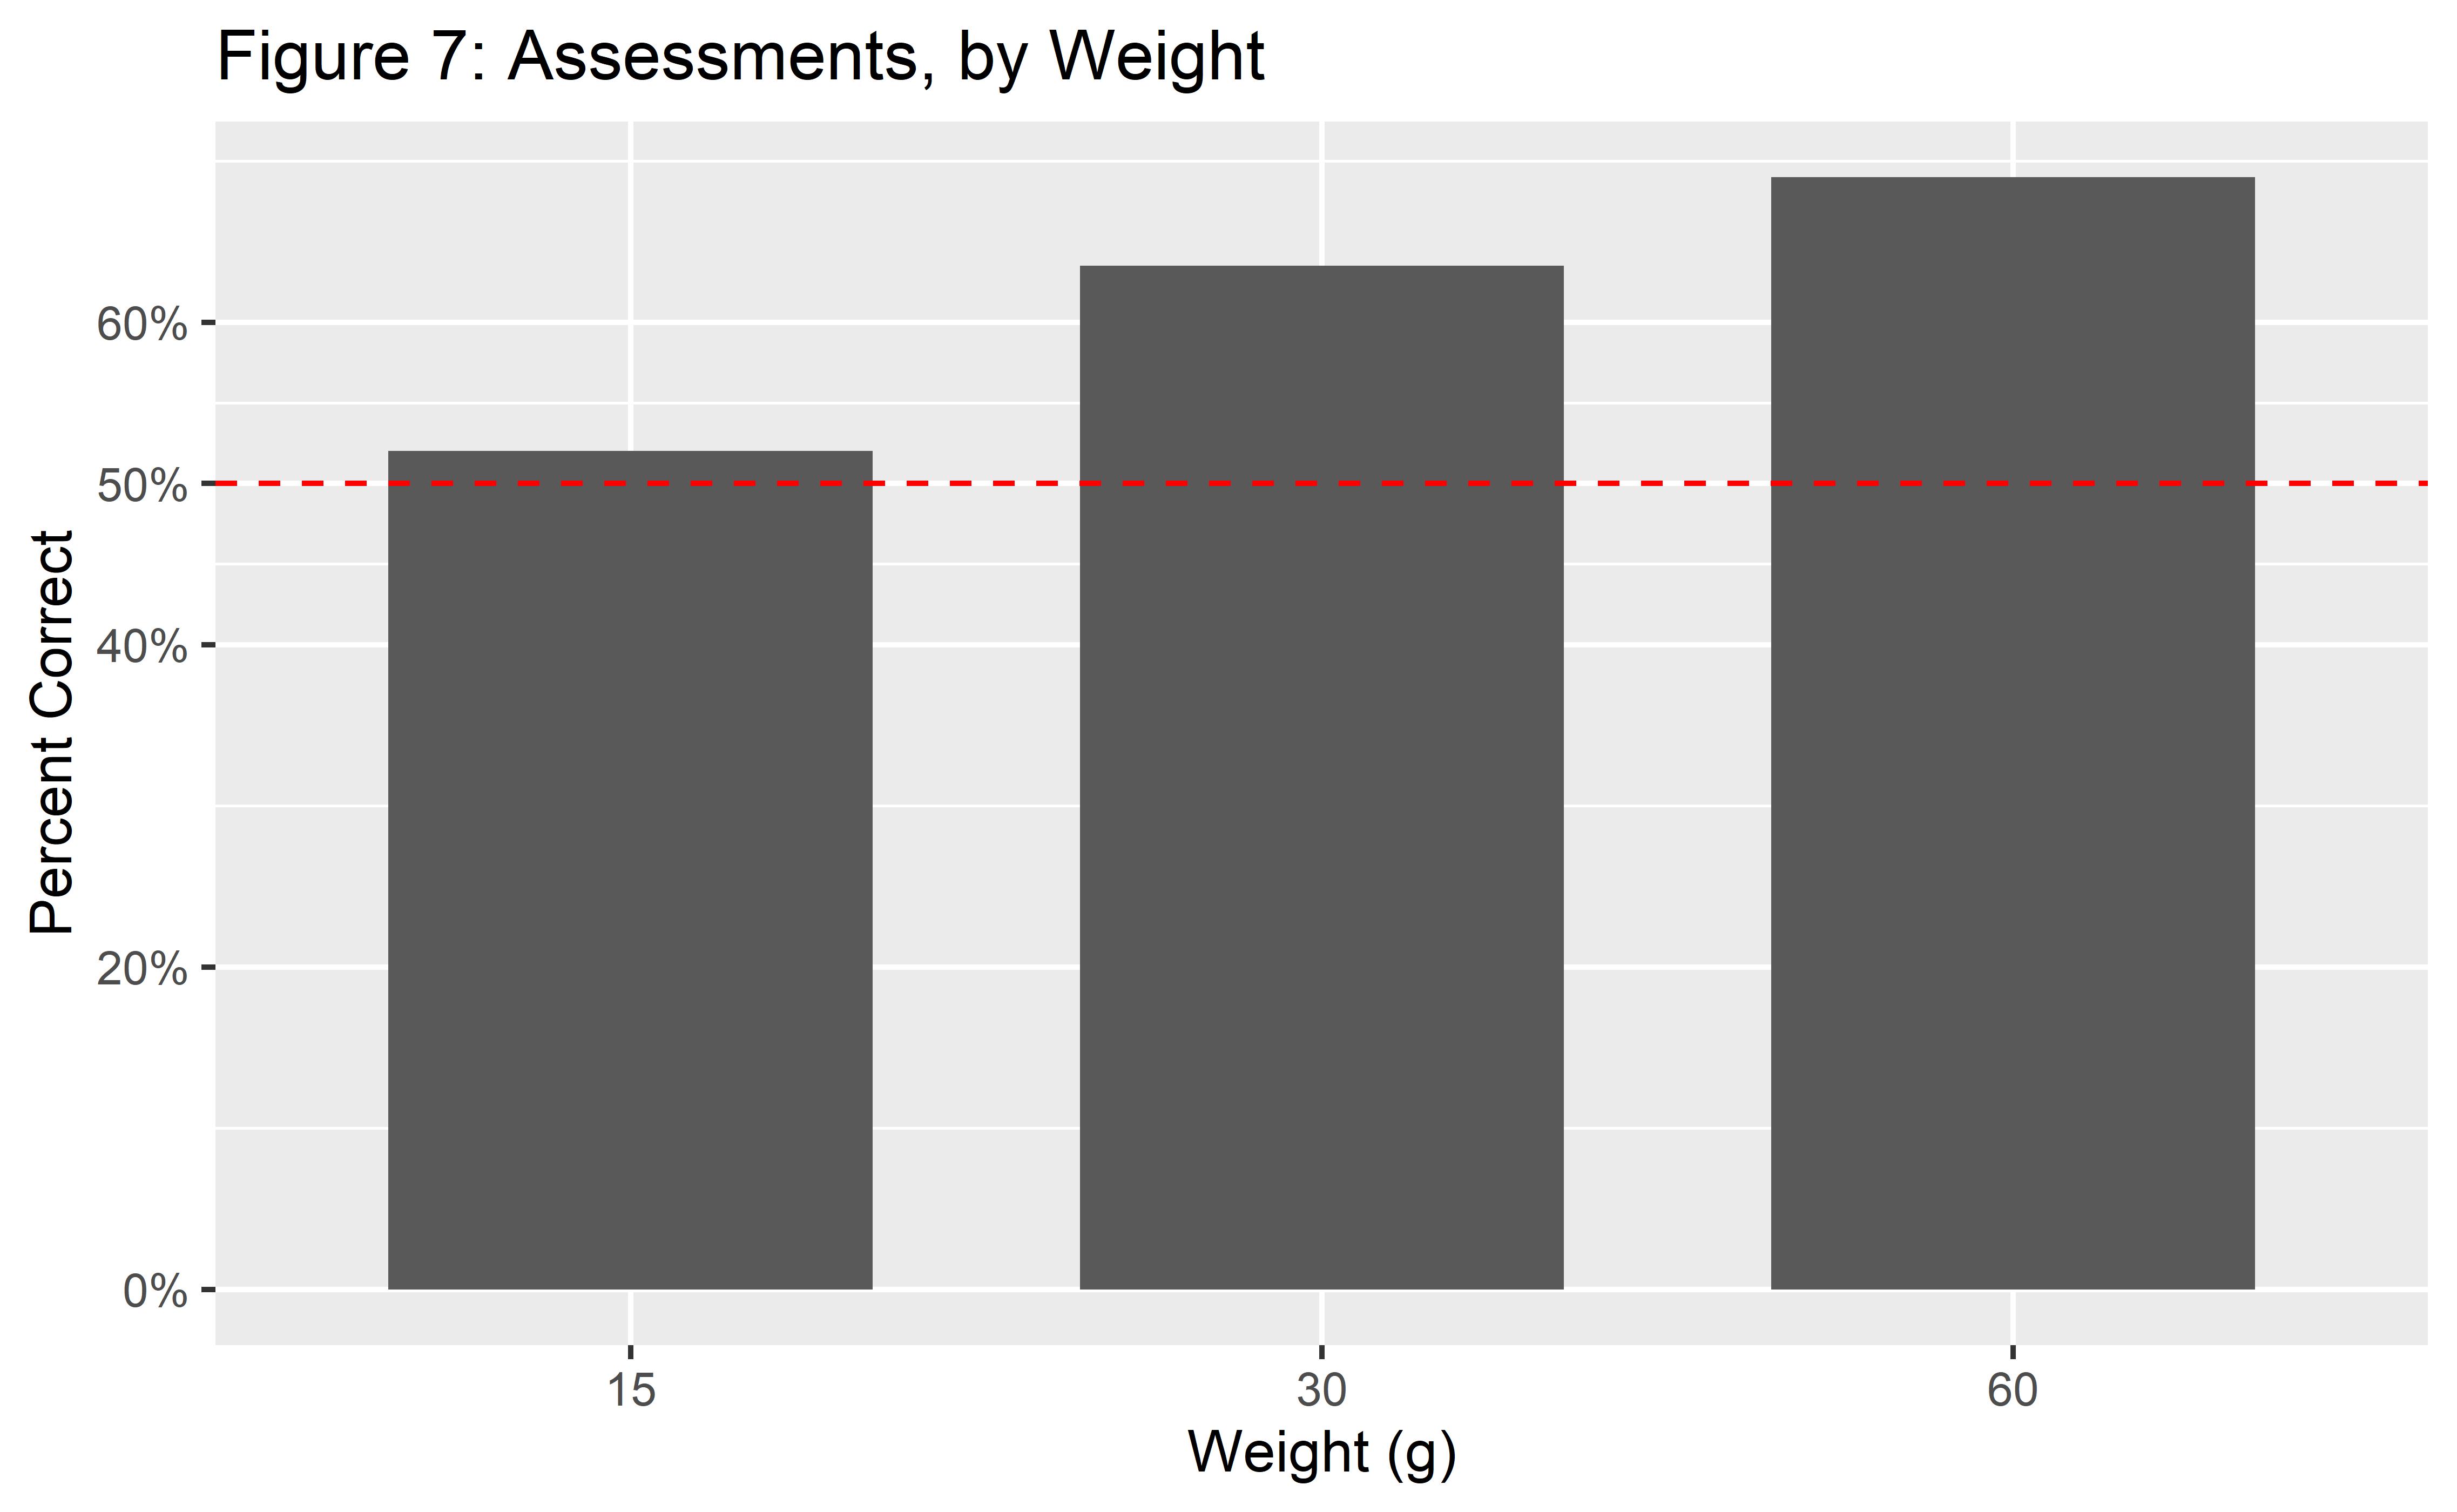 Assessments, by weight. Increasingly higher percentages of correct answers were observed for larger weights.